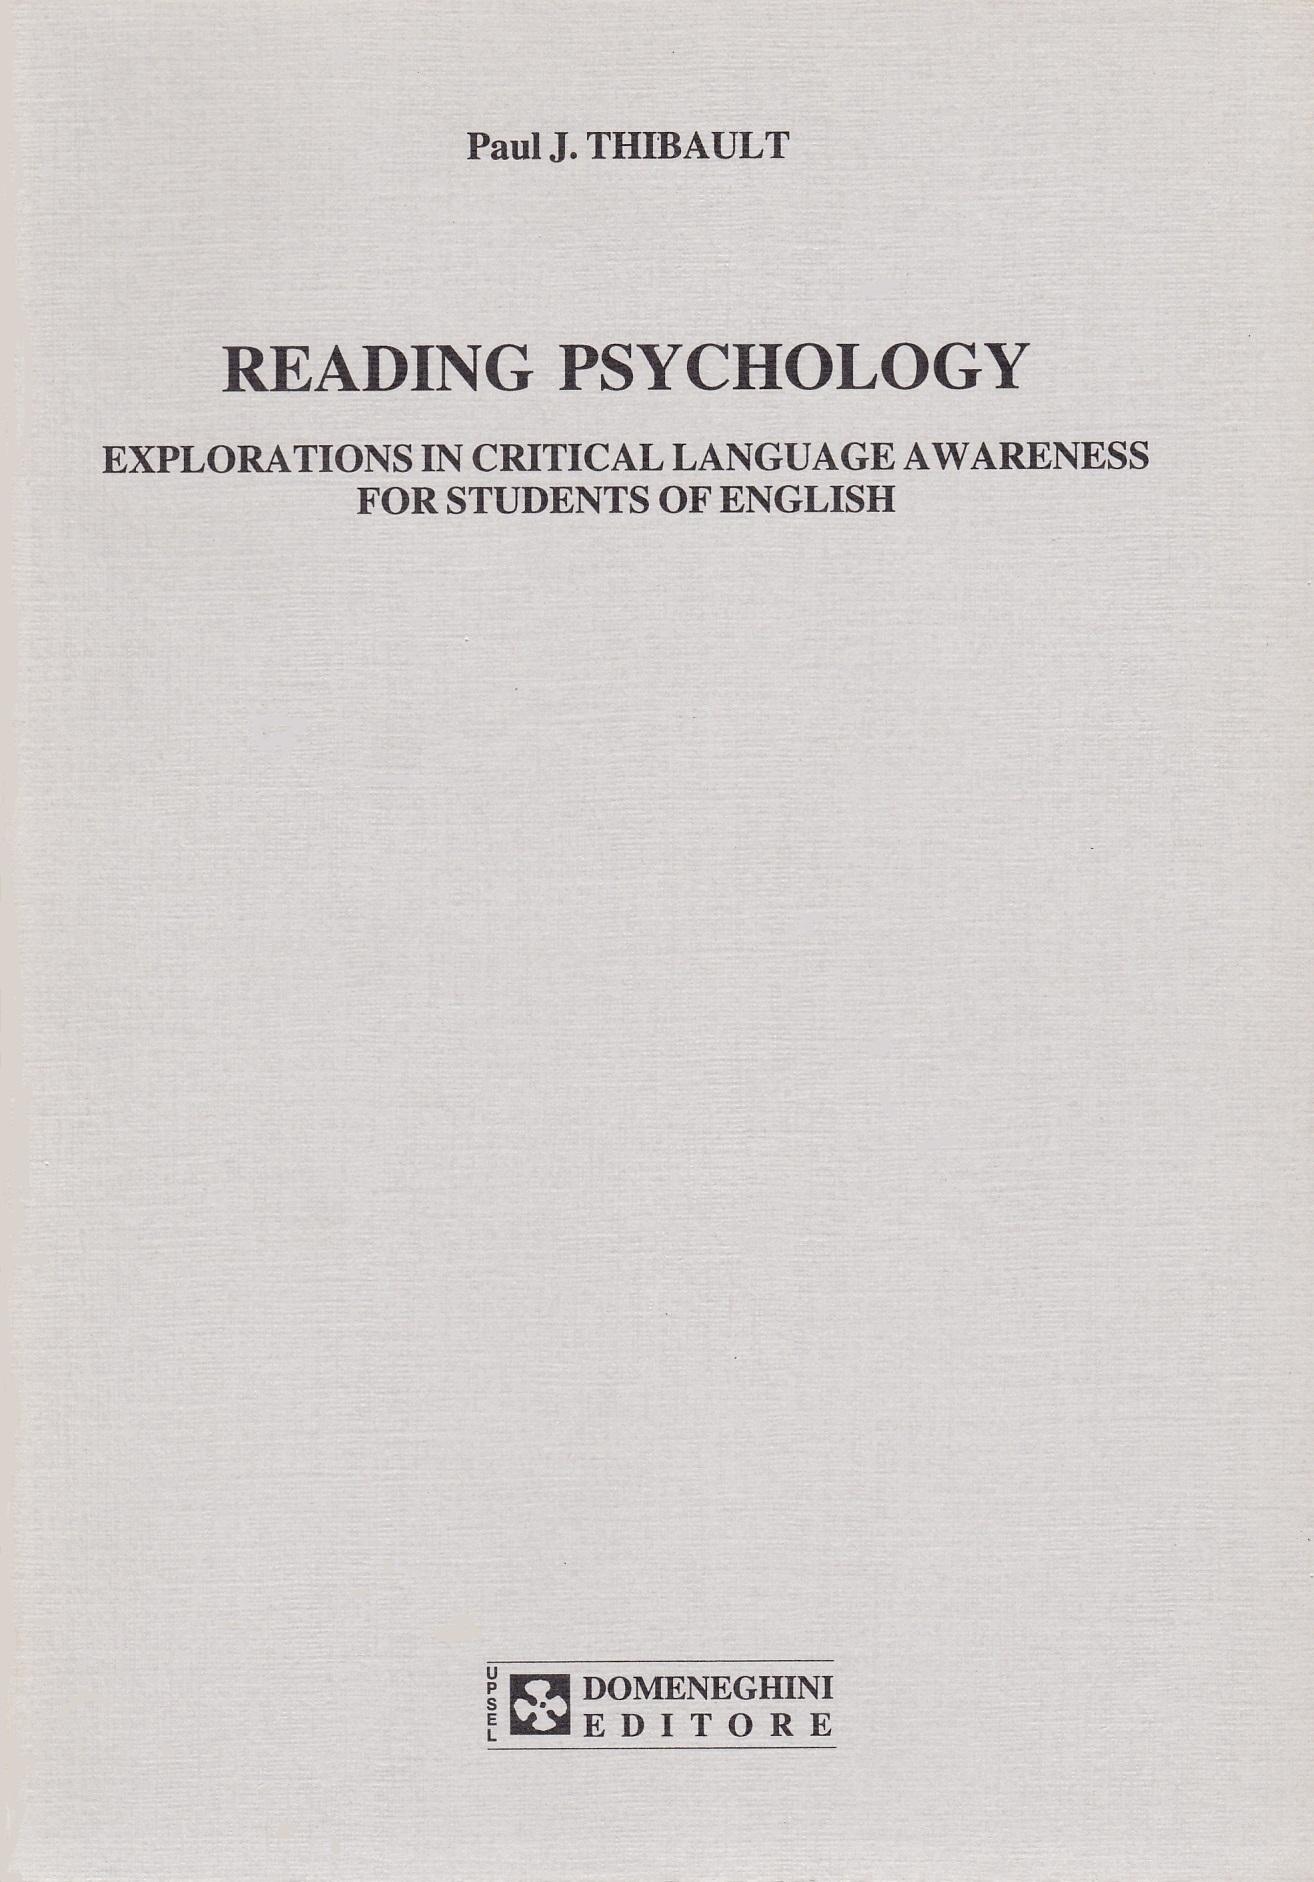 Thibault. Reading psychology. Explorations in critical language. A wareness for student of english